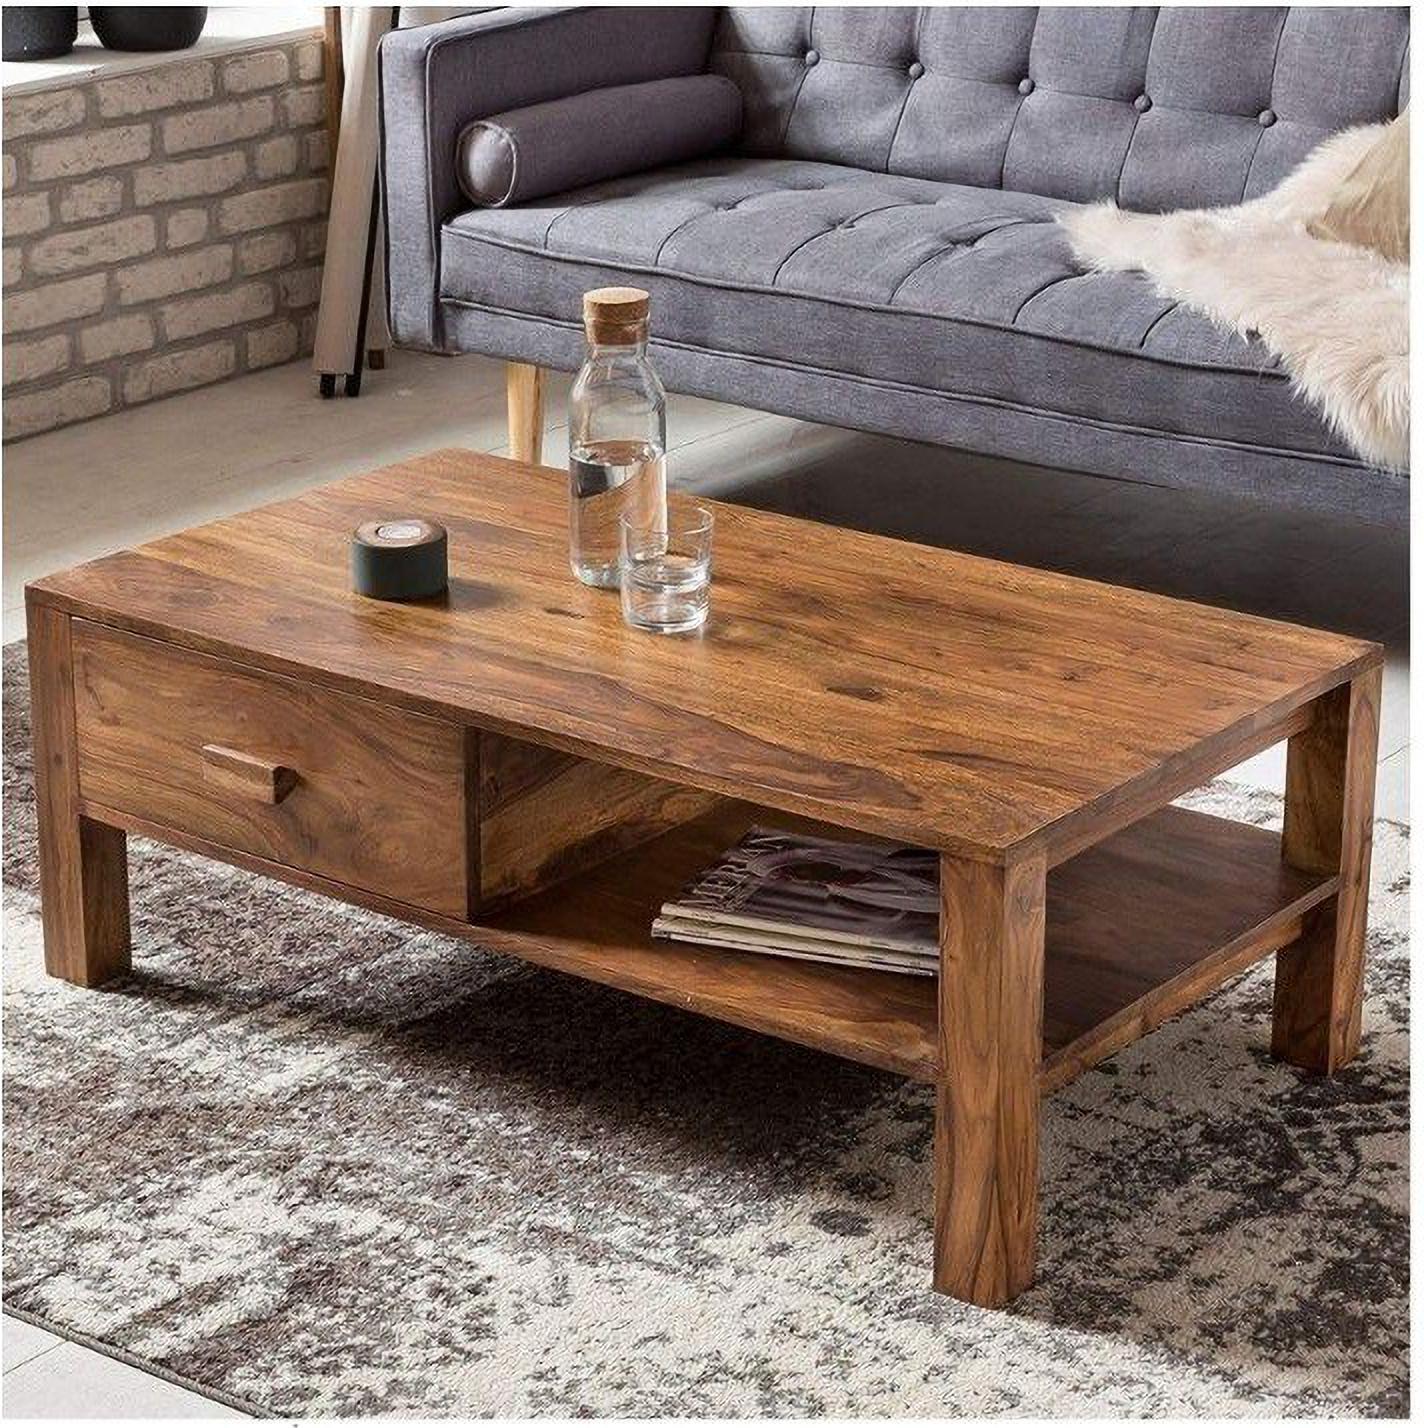 Aaram By Zebrs Center Coffee Table with Drawer & Shelf Storage for Home Living Room Solid Wood Coffee Table (Finish Color - Natural, Pre-assembled)